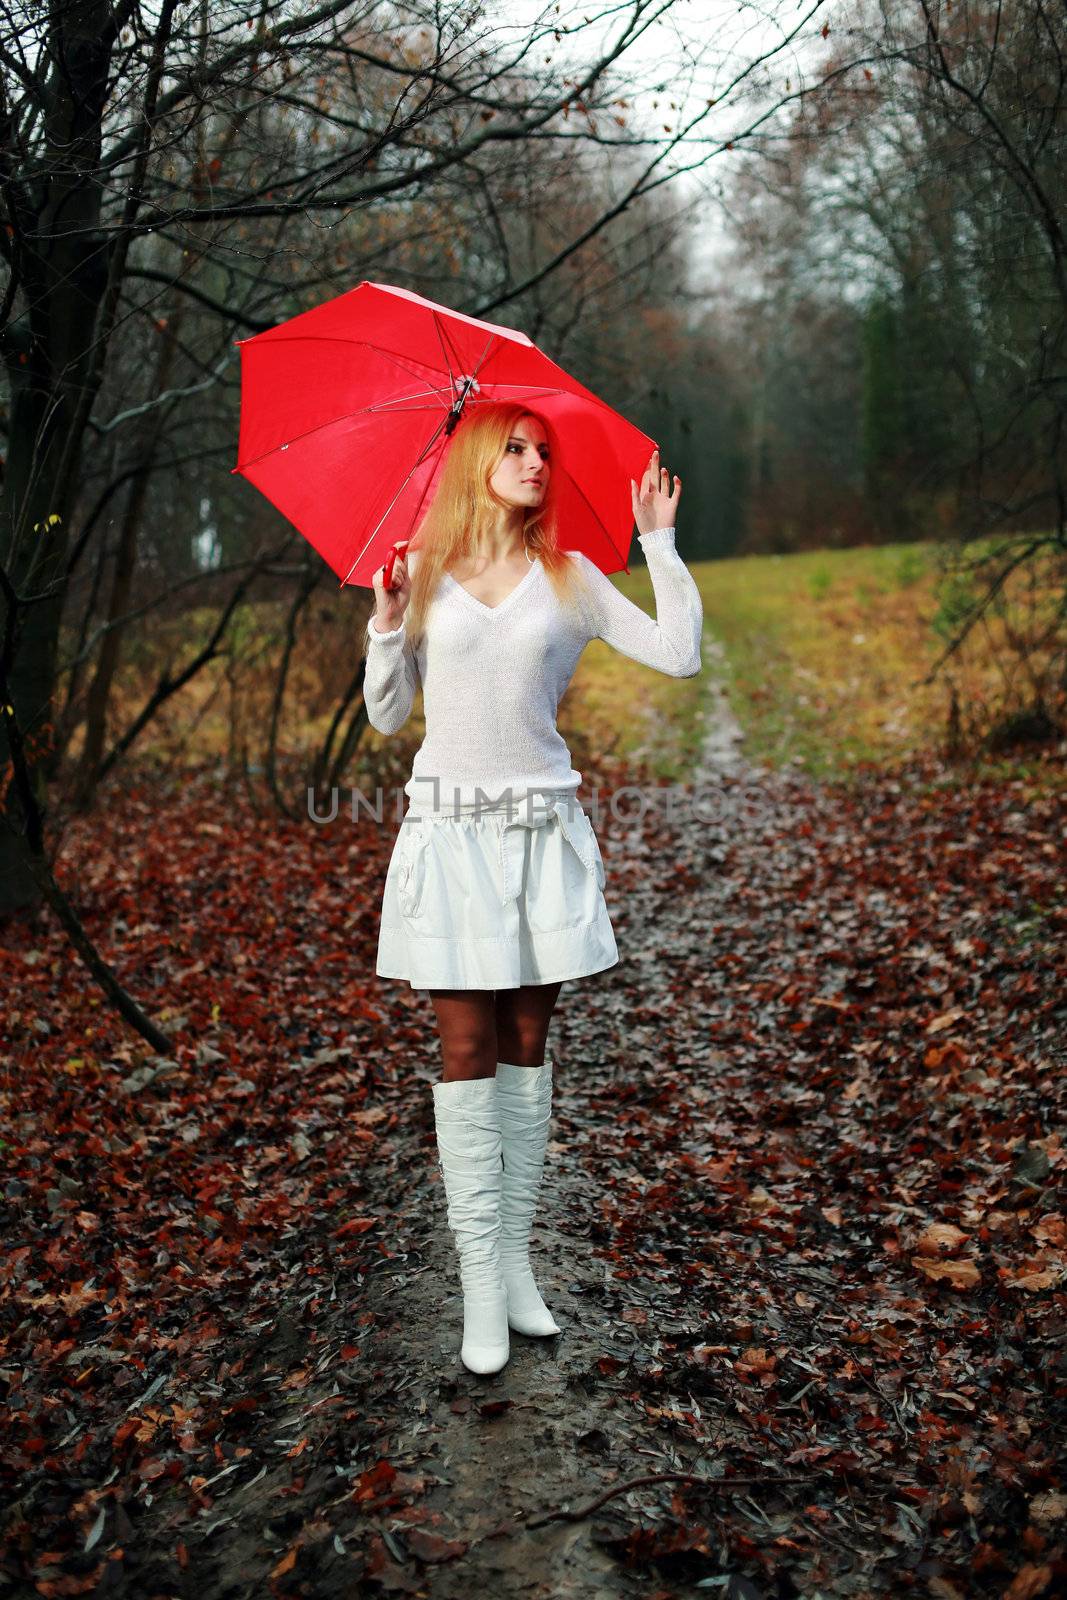 A woman with a red umbrella in the park